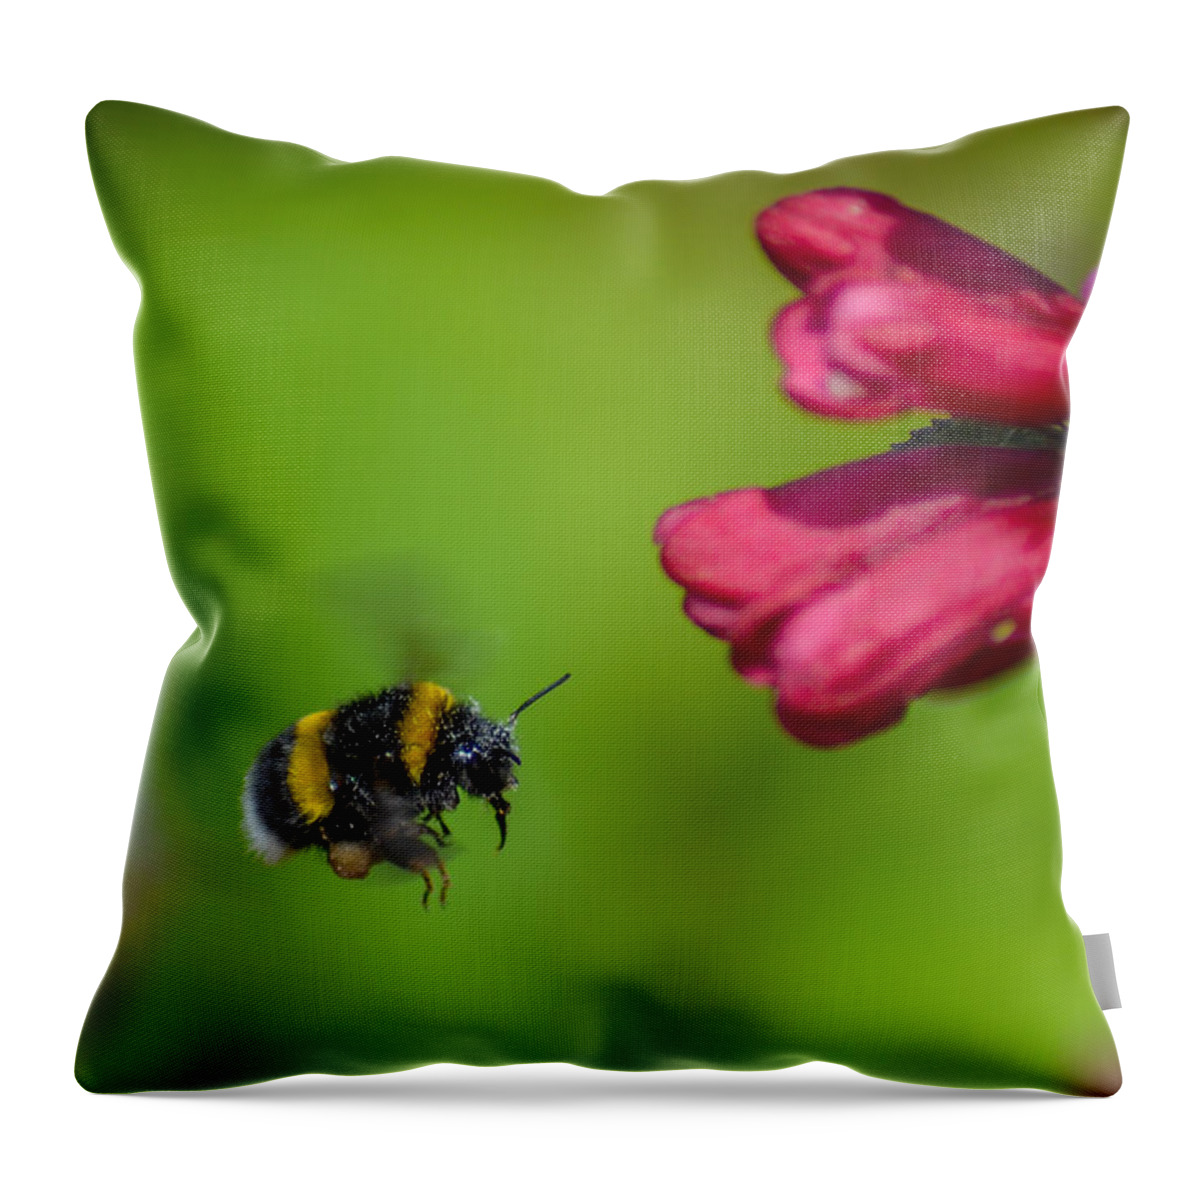 Honey Throw Pillow featuring the photograph Flying Bumblebee by Rainer Kersten